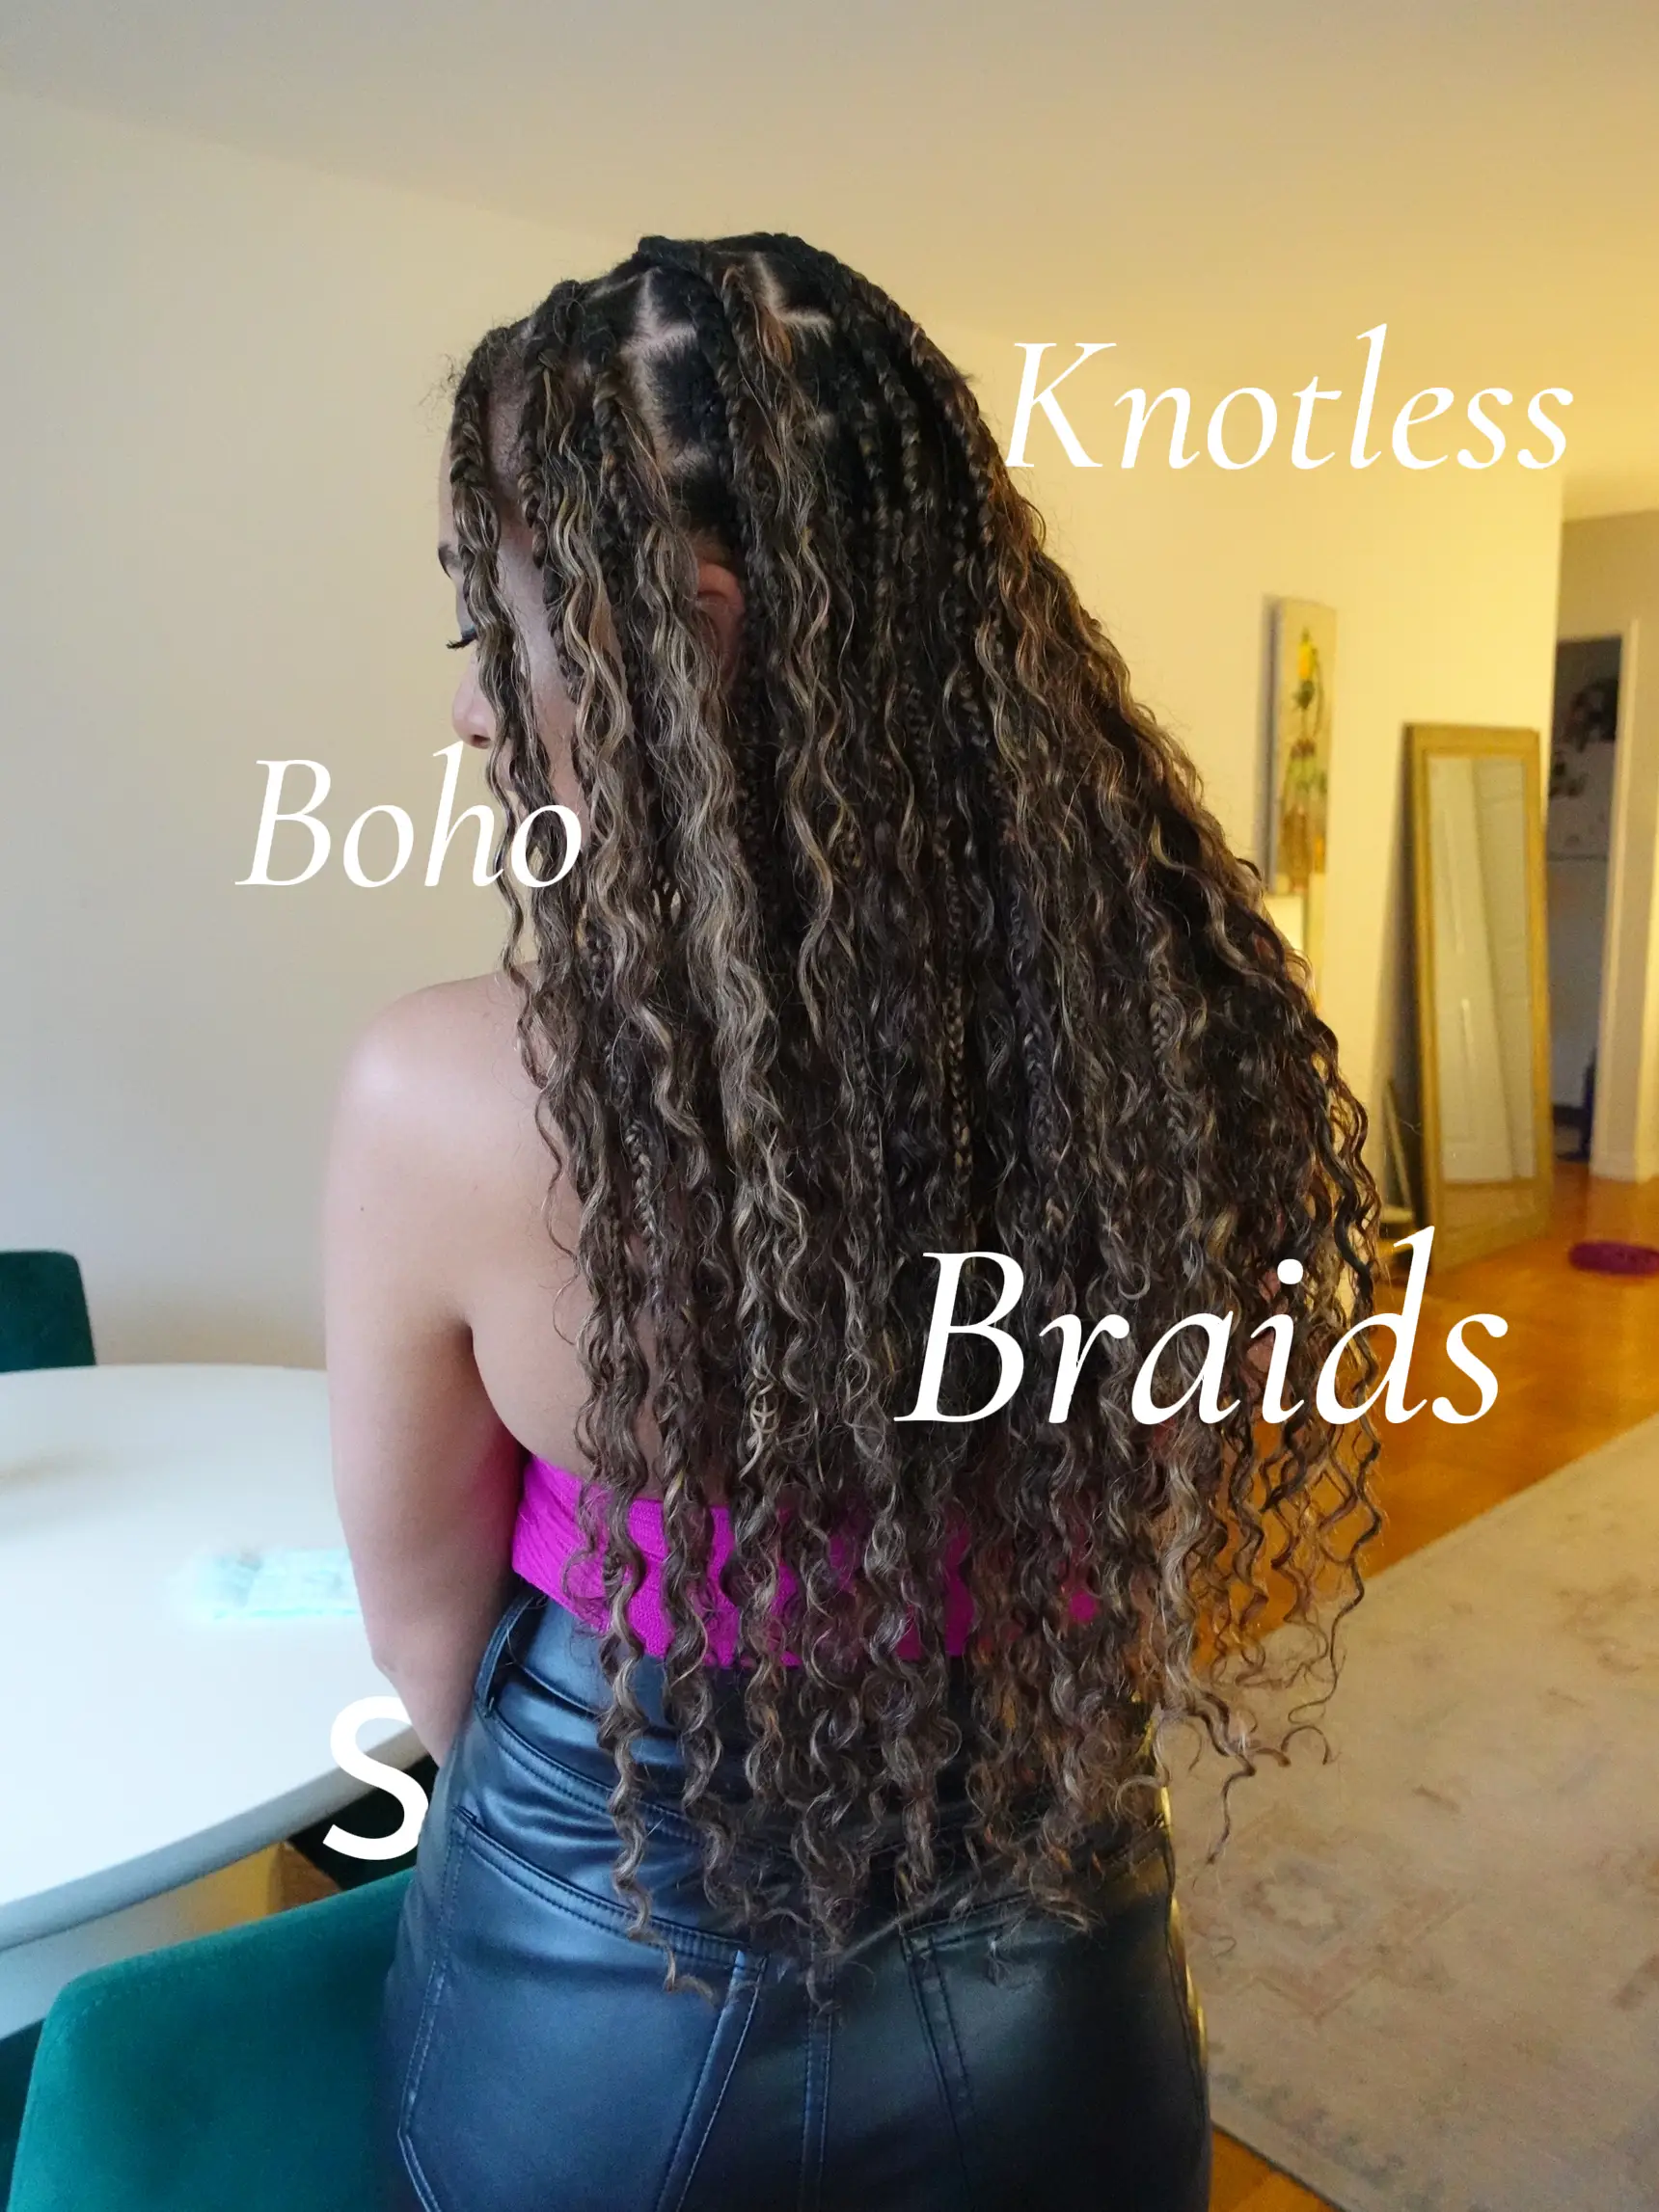 Knotless Boho Braids 👩🏽‍🦱, Gallery posted by Ashley